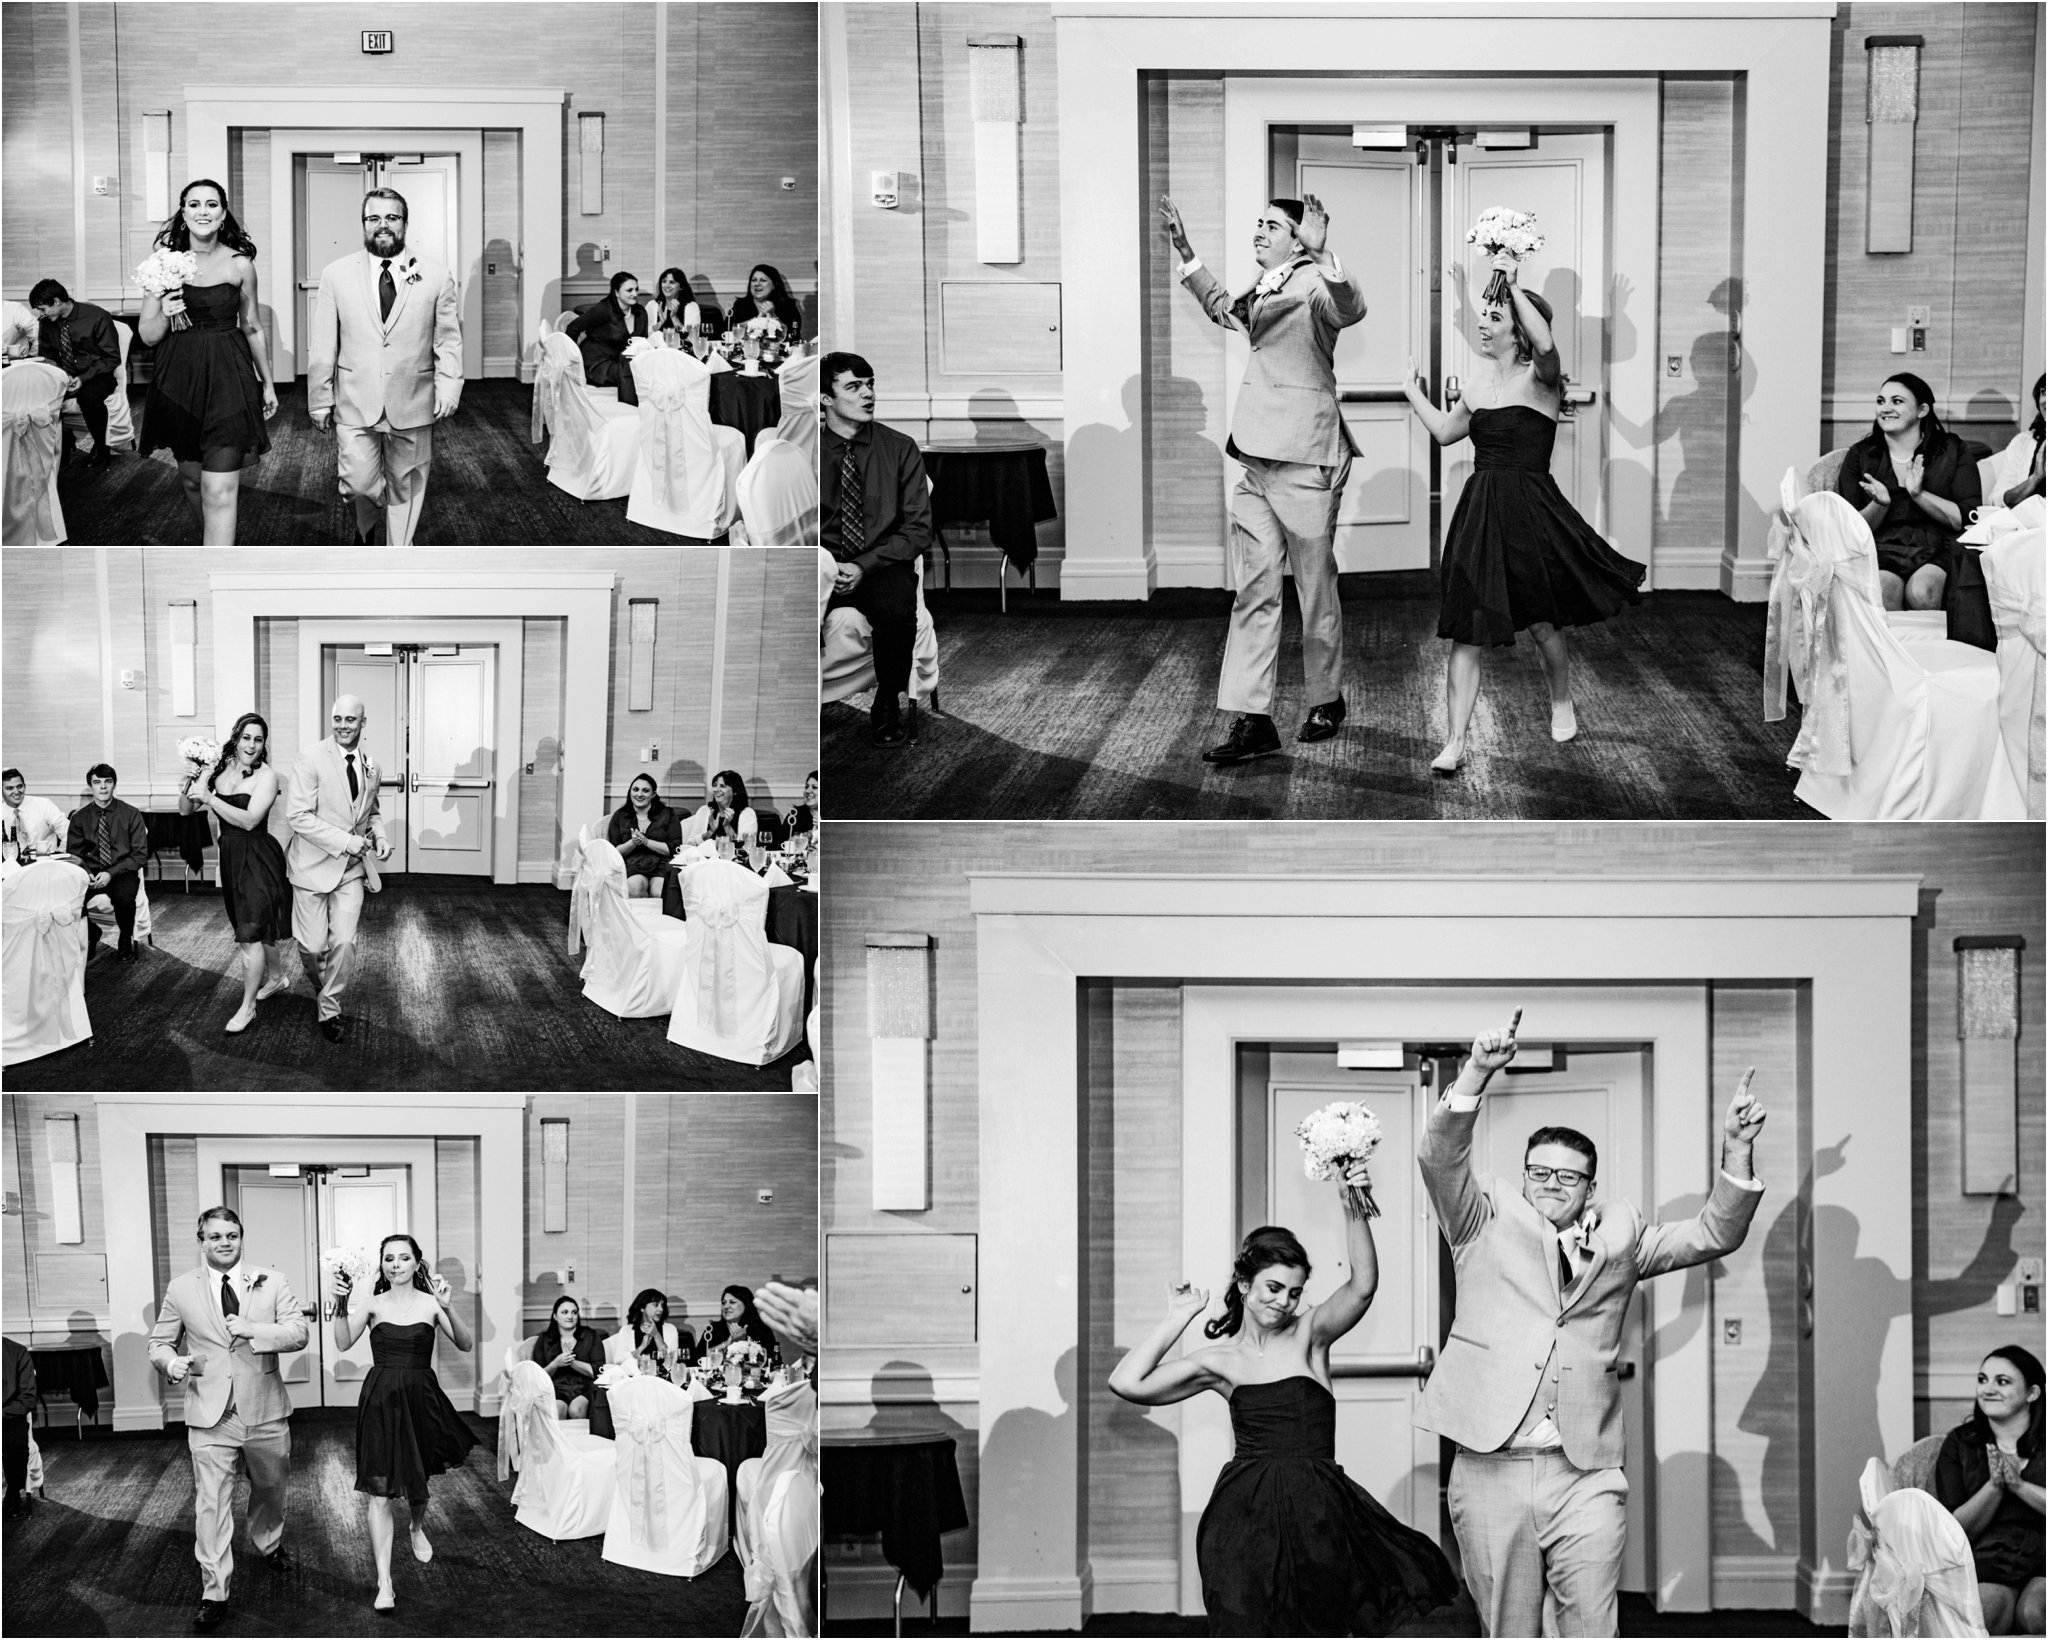 black and white | wedding | wedding photos | wedding photography | images by feliciathephotographer.com | Country Club Plaza | Kansas City | The Marriott | Unity Temple | reception venue | bridal party entrance | candid 